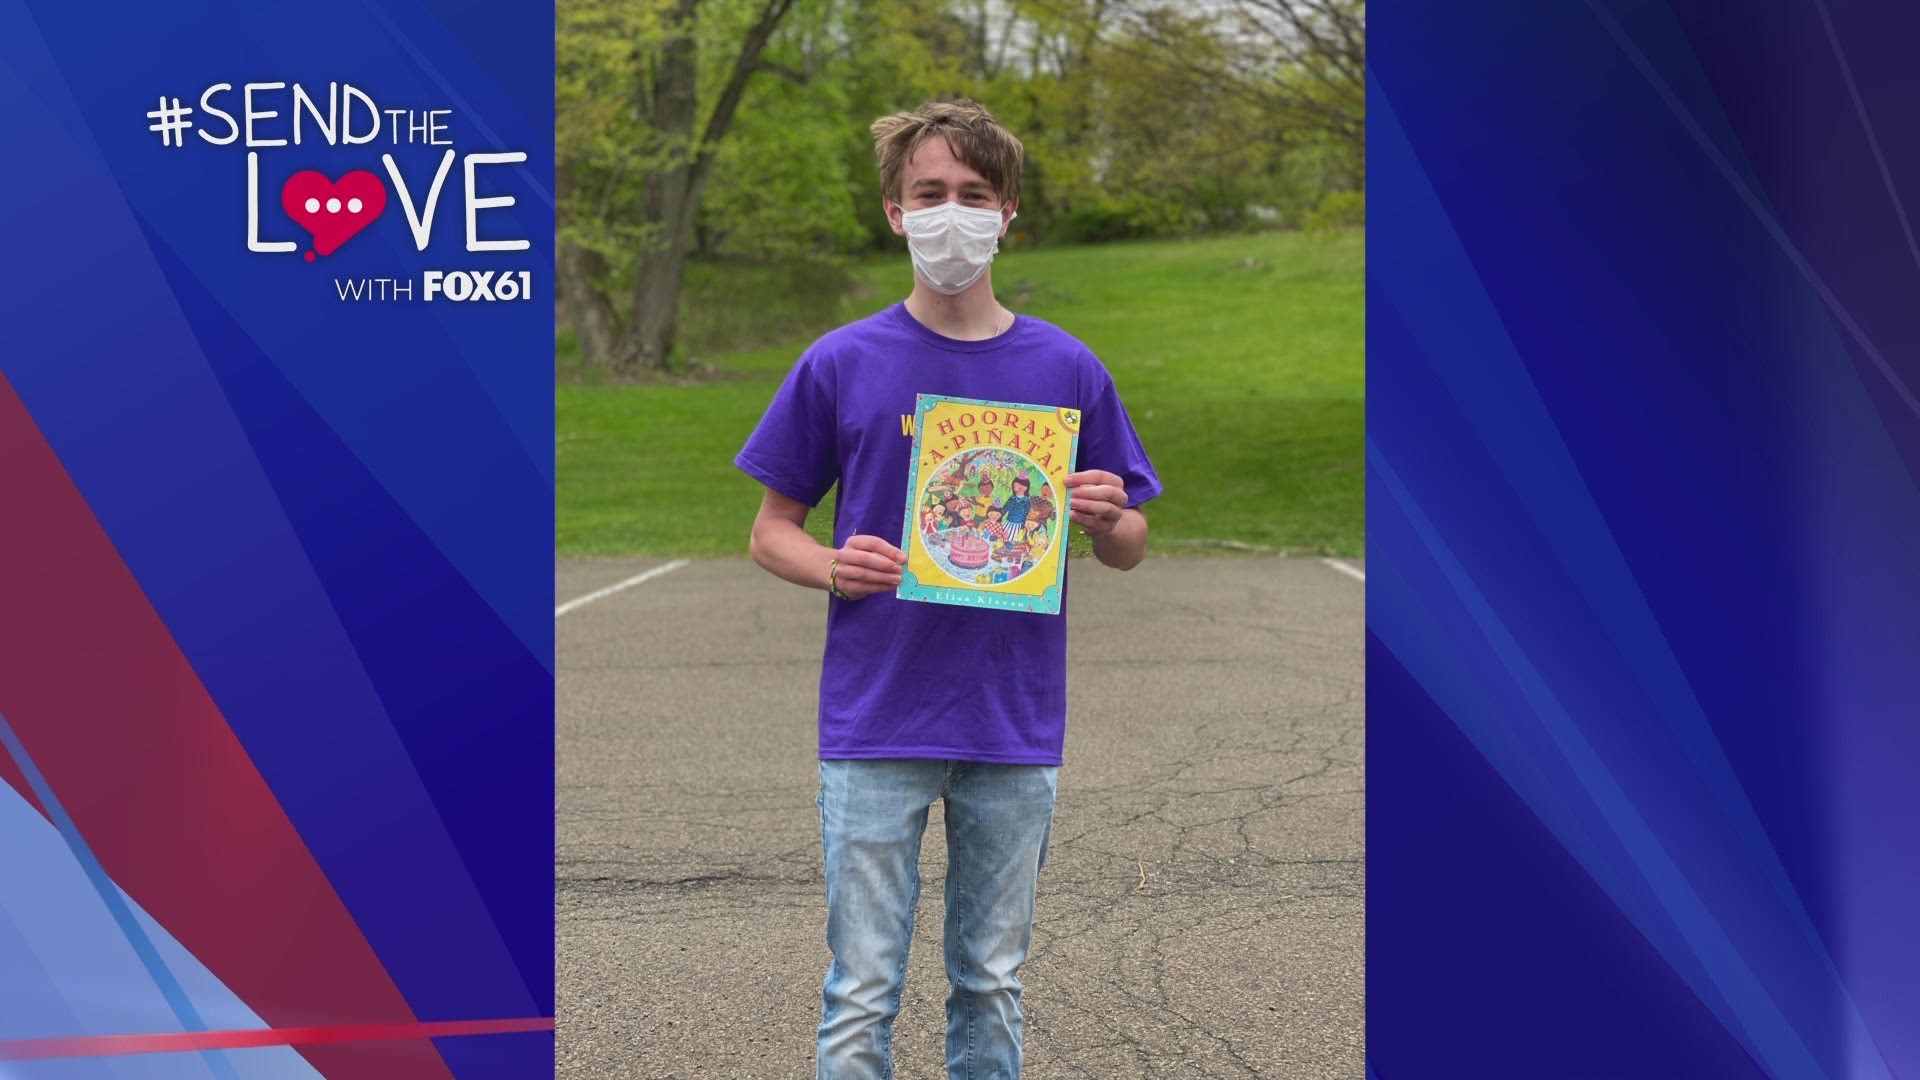 A group of high schoolers from Westhill High School in Stamford wanted to do their part to help out with the COVID-19 pandemic.